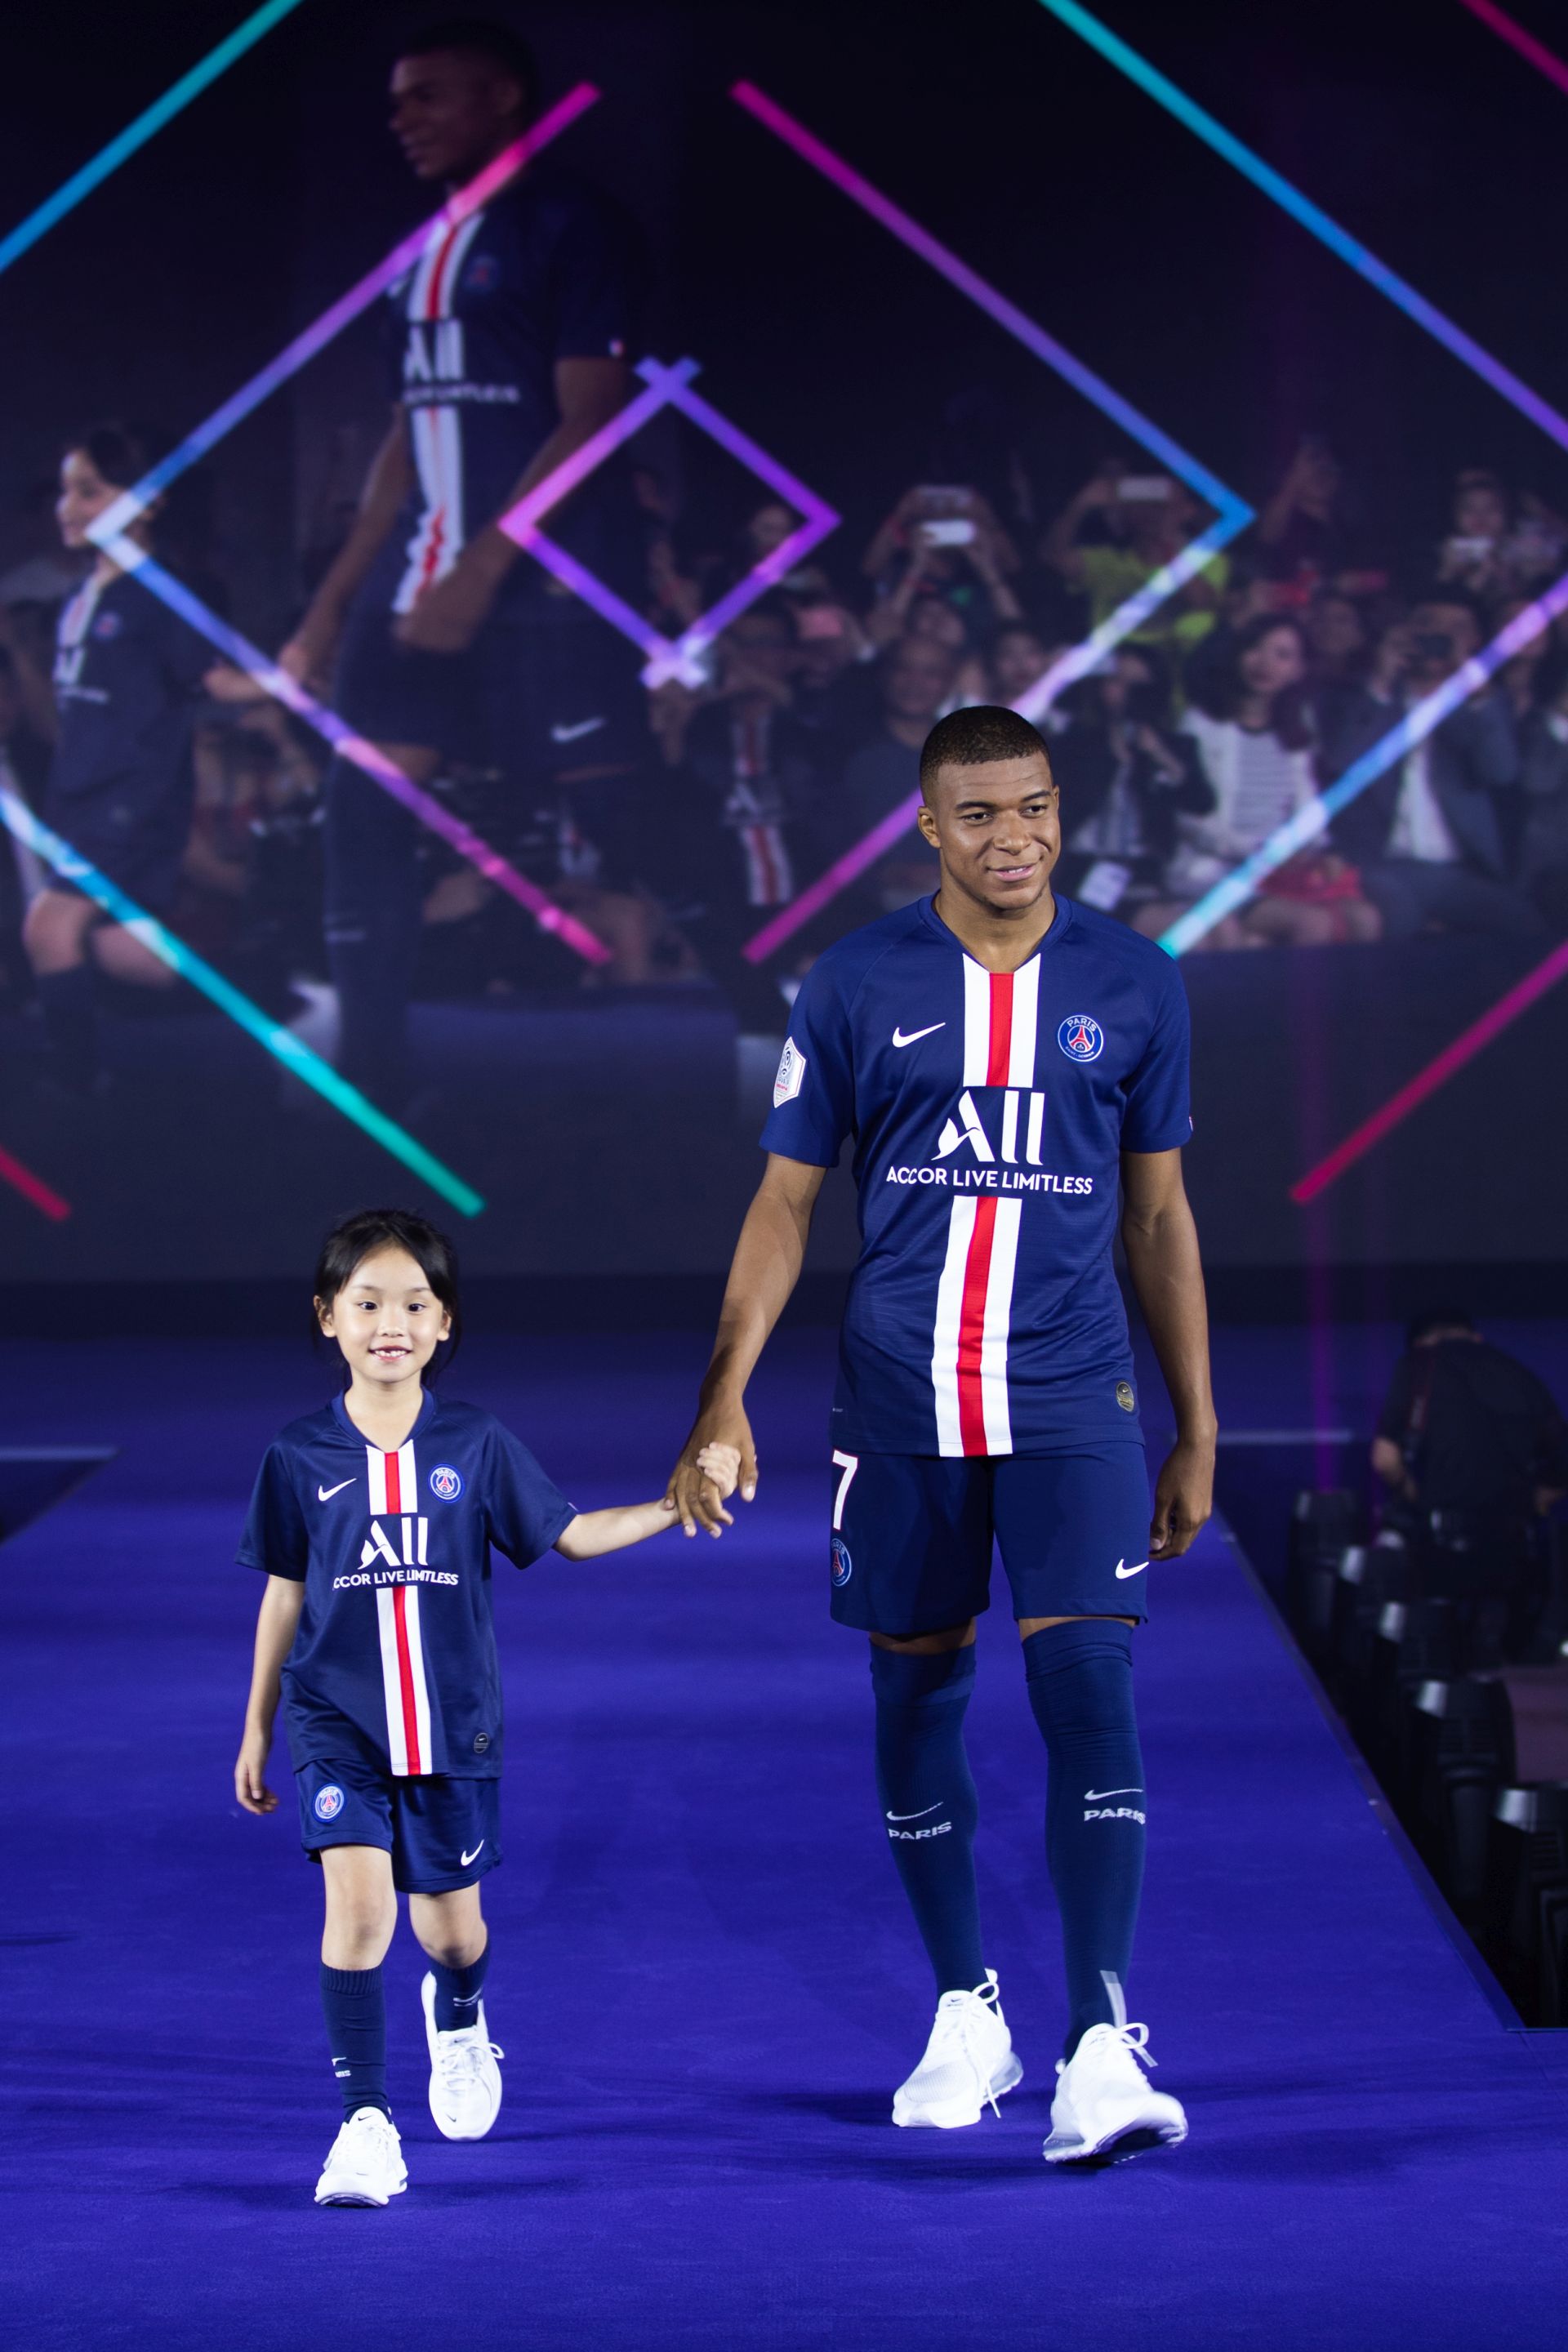 Rising star Kylian Mbappe with his entourage (photo © PSG-Accor Live)